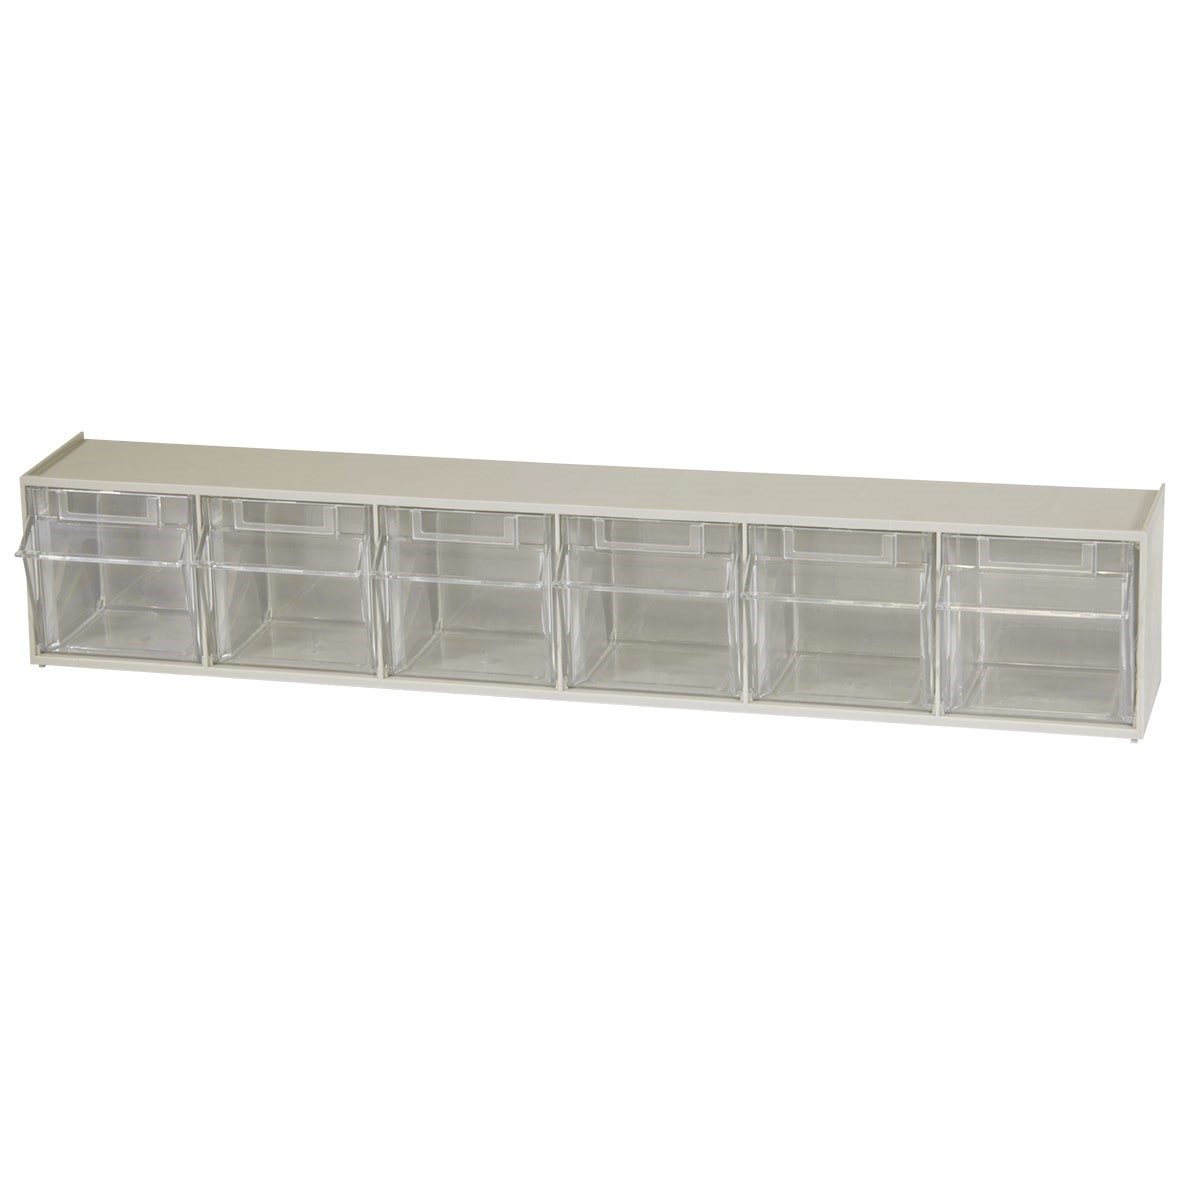 Akro-Mils TiltView Horizontal Plastic Organizer Storage System Cabinet with 6 Tip Out Bins, (23-5/8-Inch Wide x 4-1/2-Inch High x 3-3/4-Inch Deep), Stone 06706 - image 5 of 7